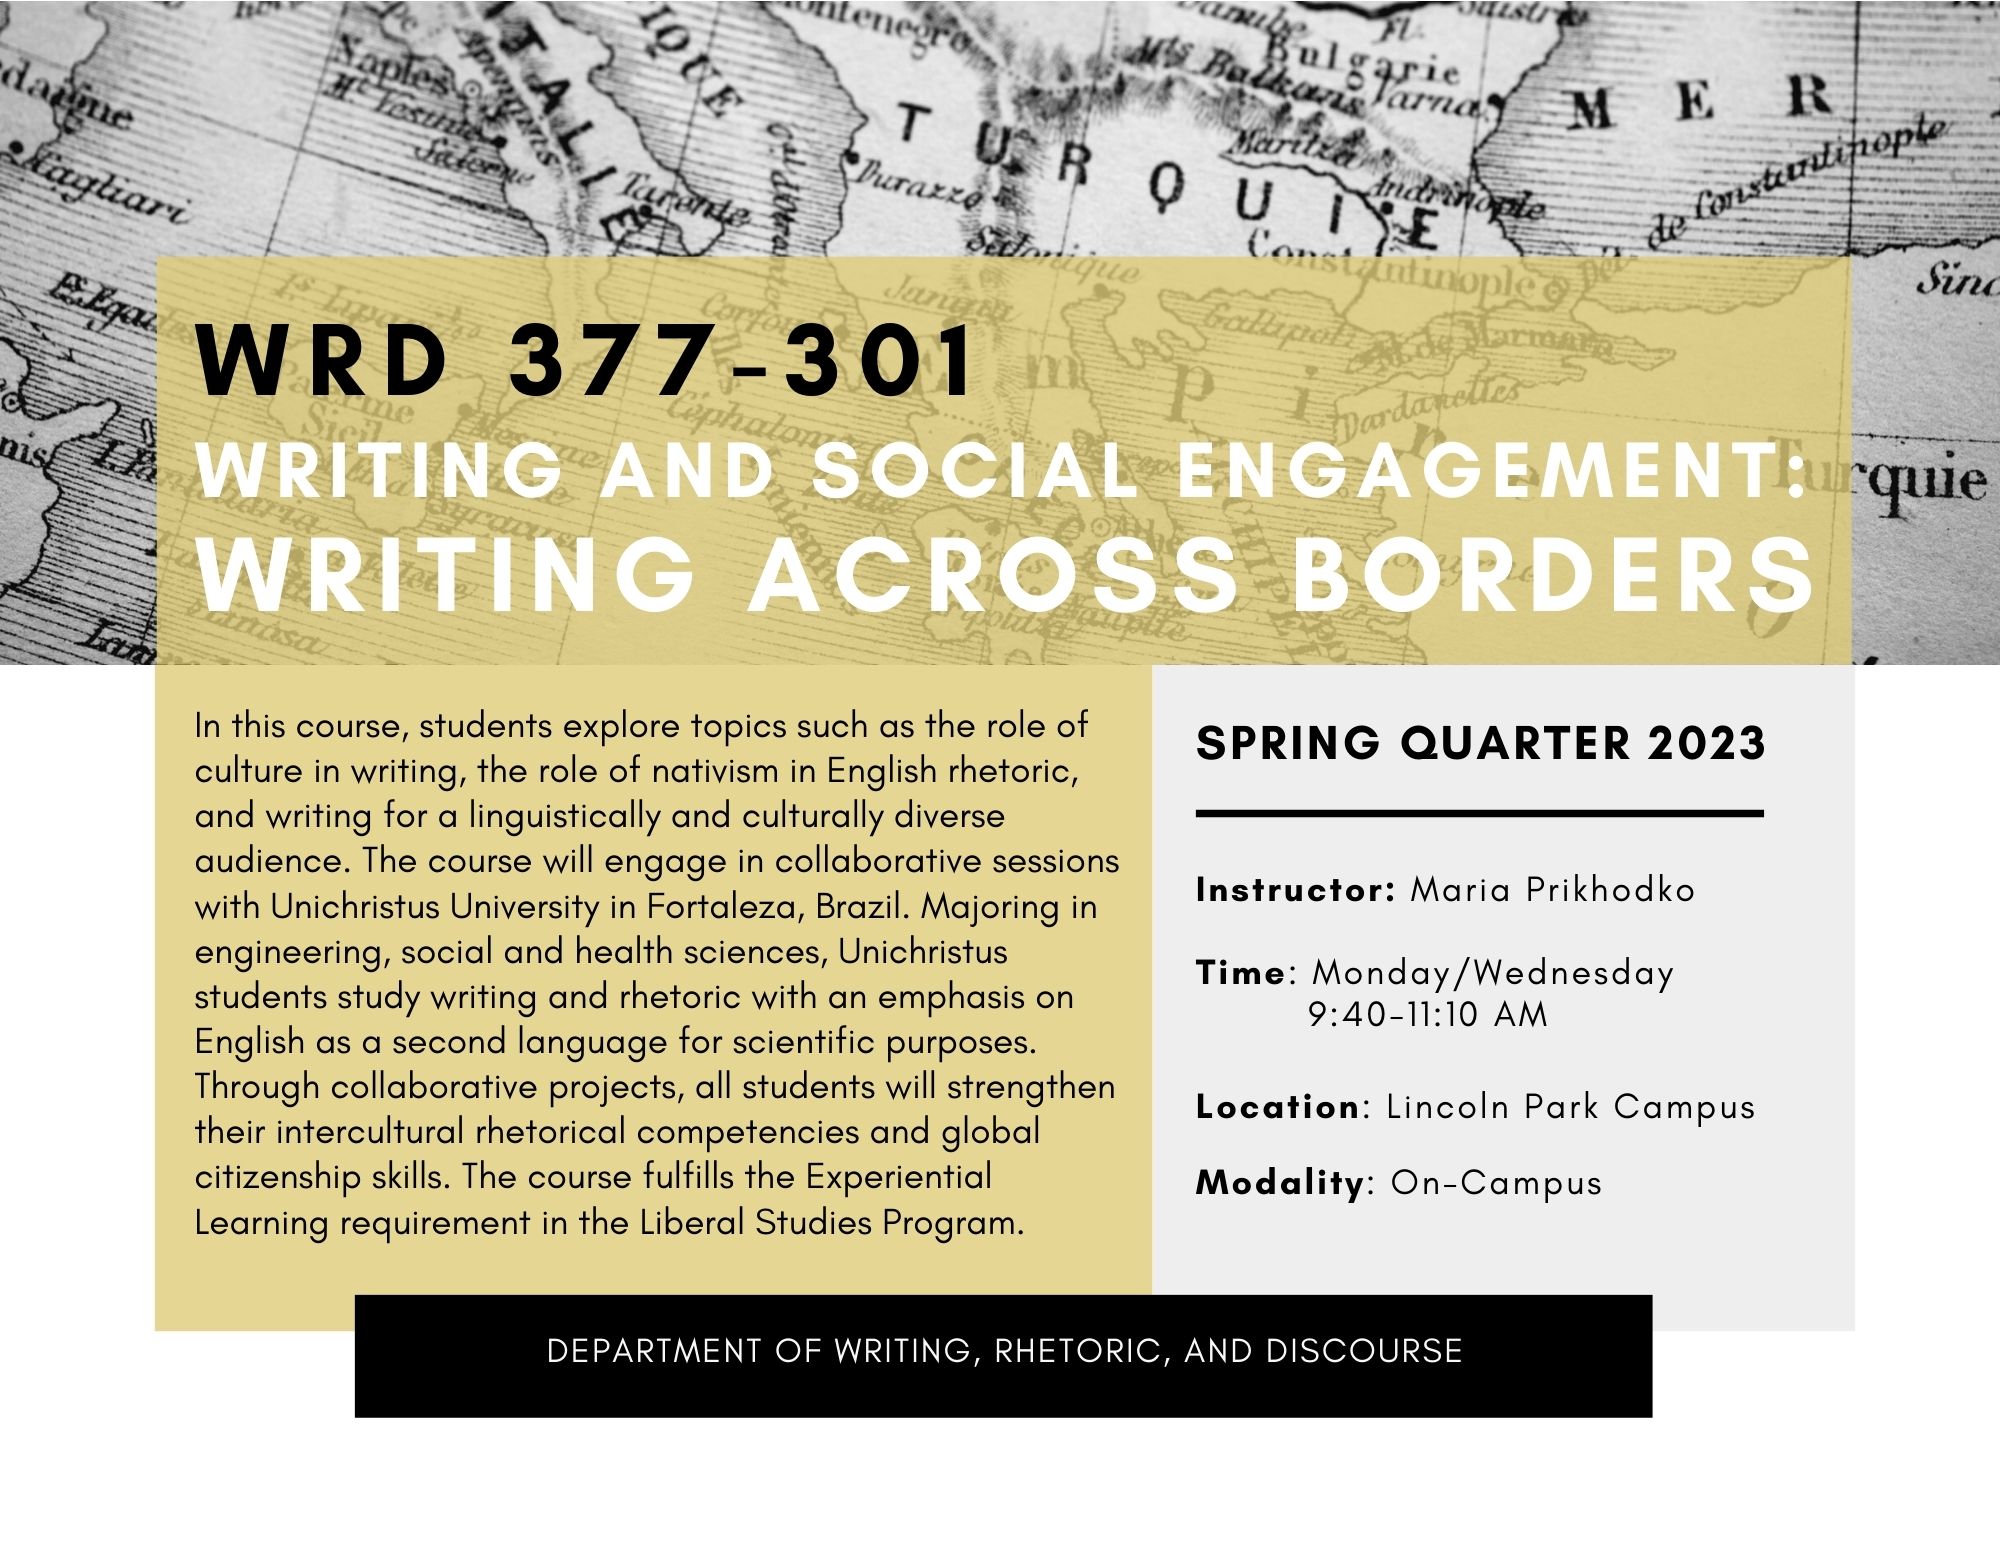 WRD 377-301: Writing and Social Engagement: Writing Across Borders 